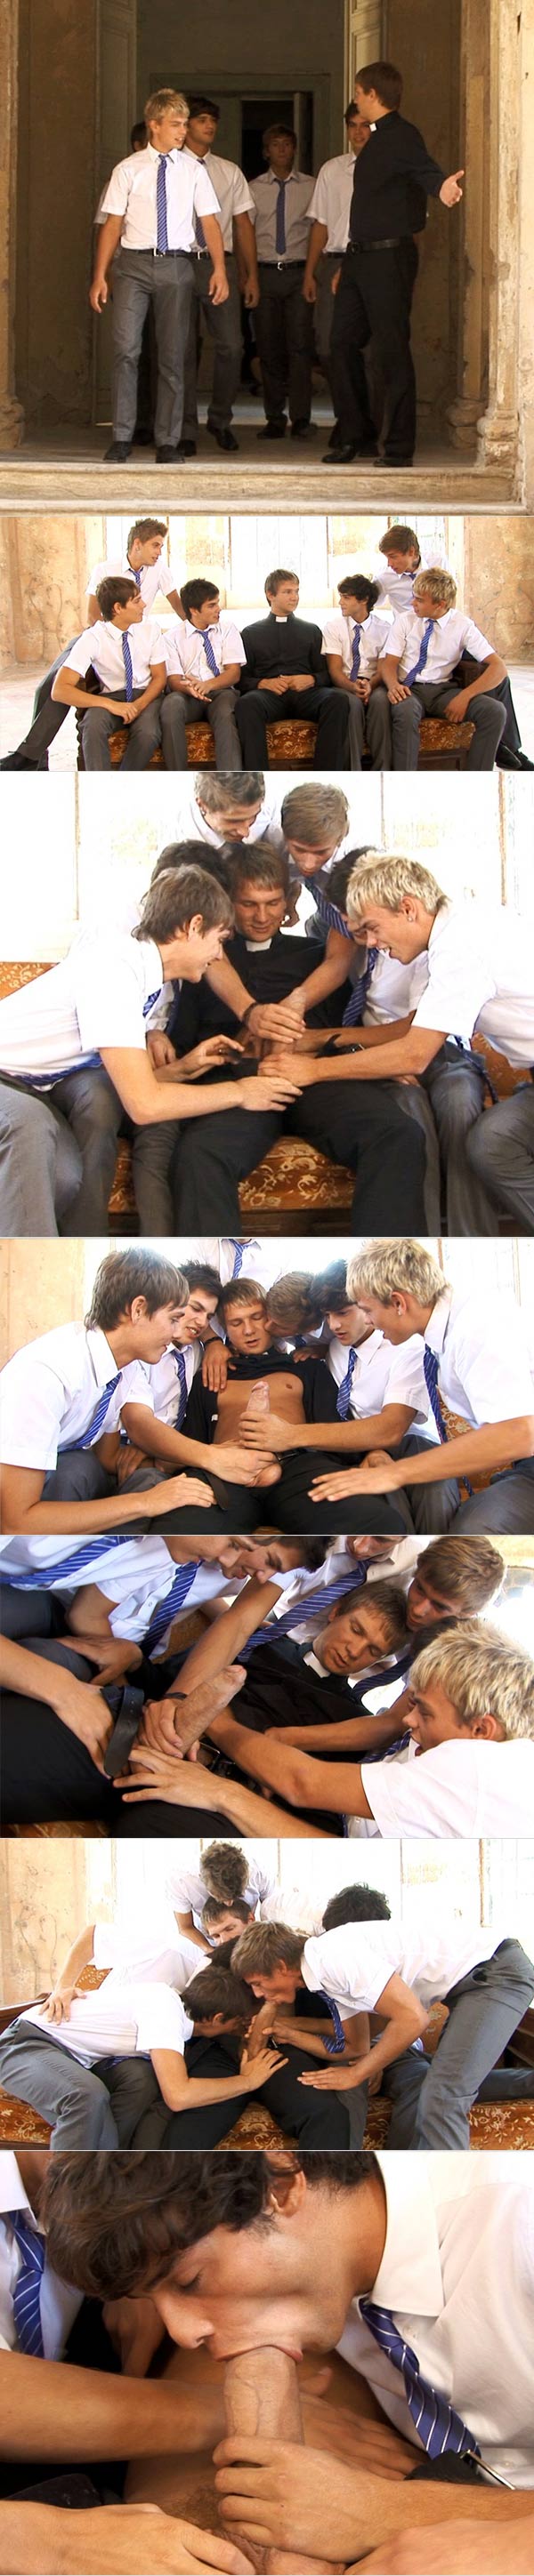 Scandal in the Vatican (Trevor Yates & The Kinky Angels) at BelAmiOnline.com